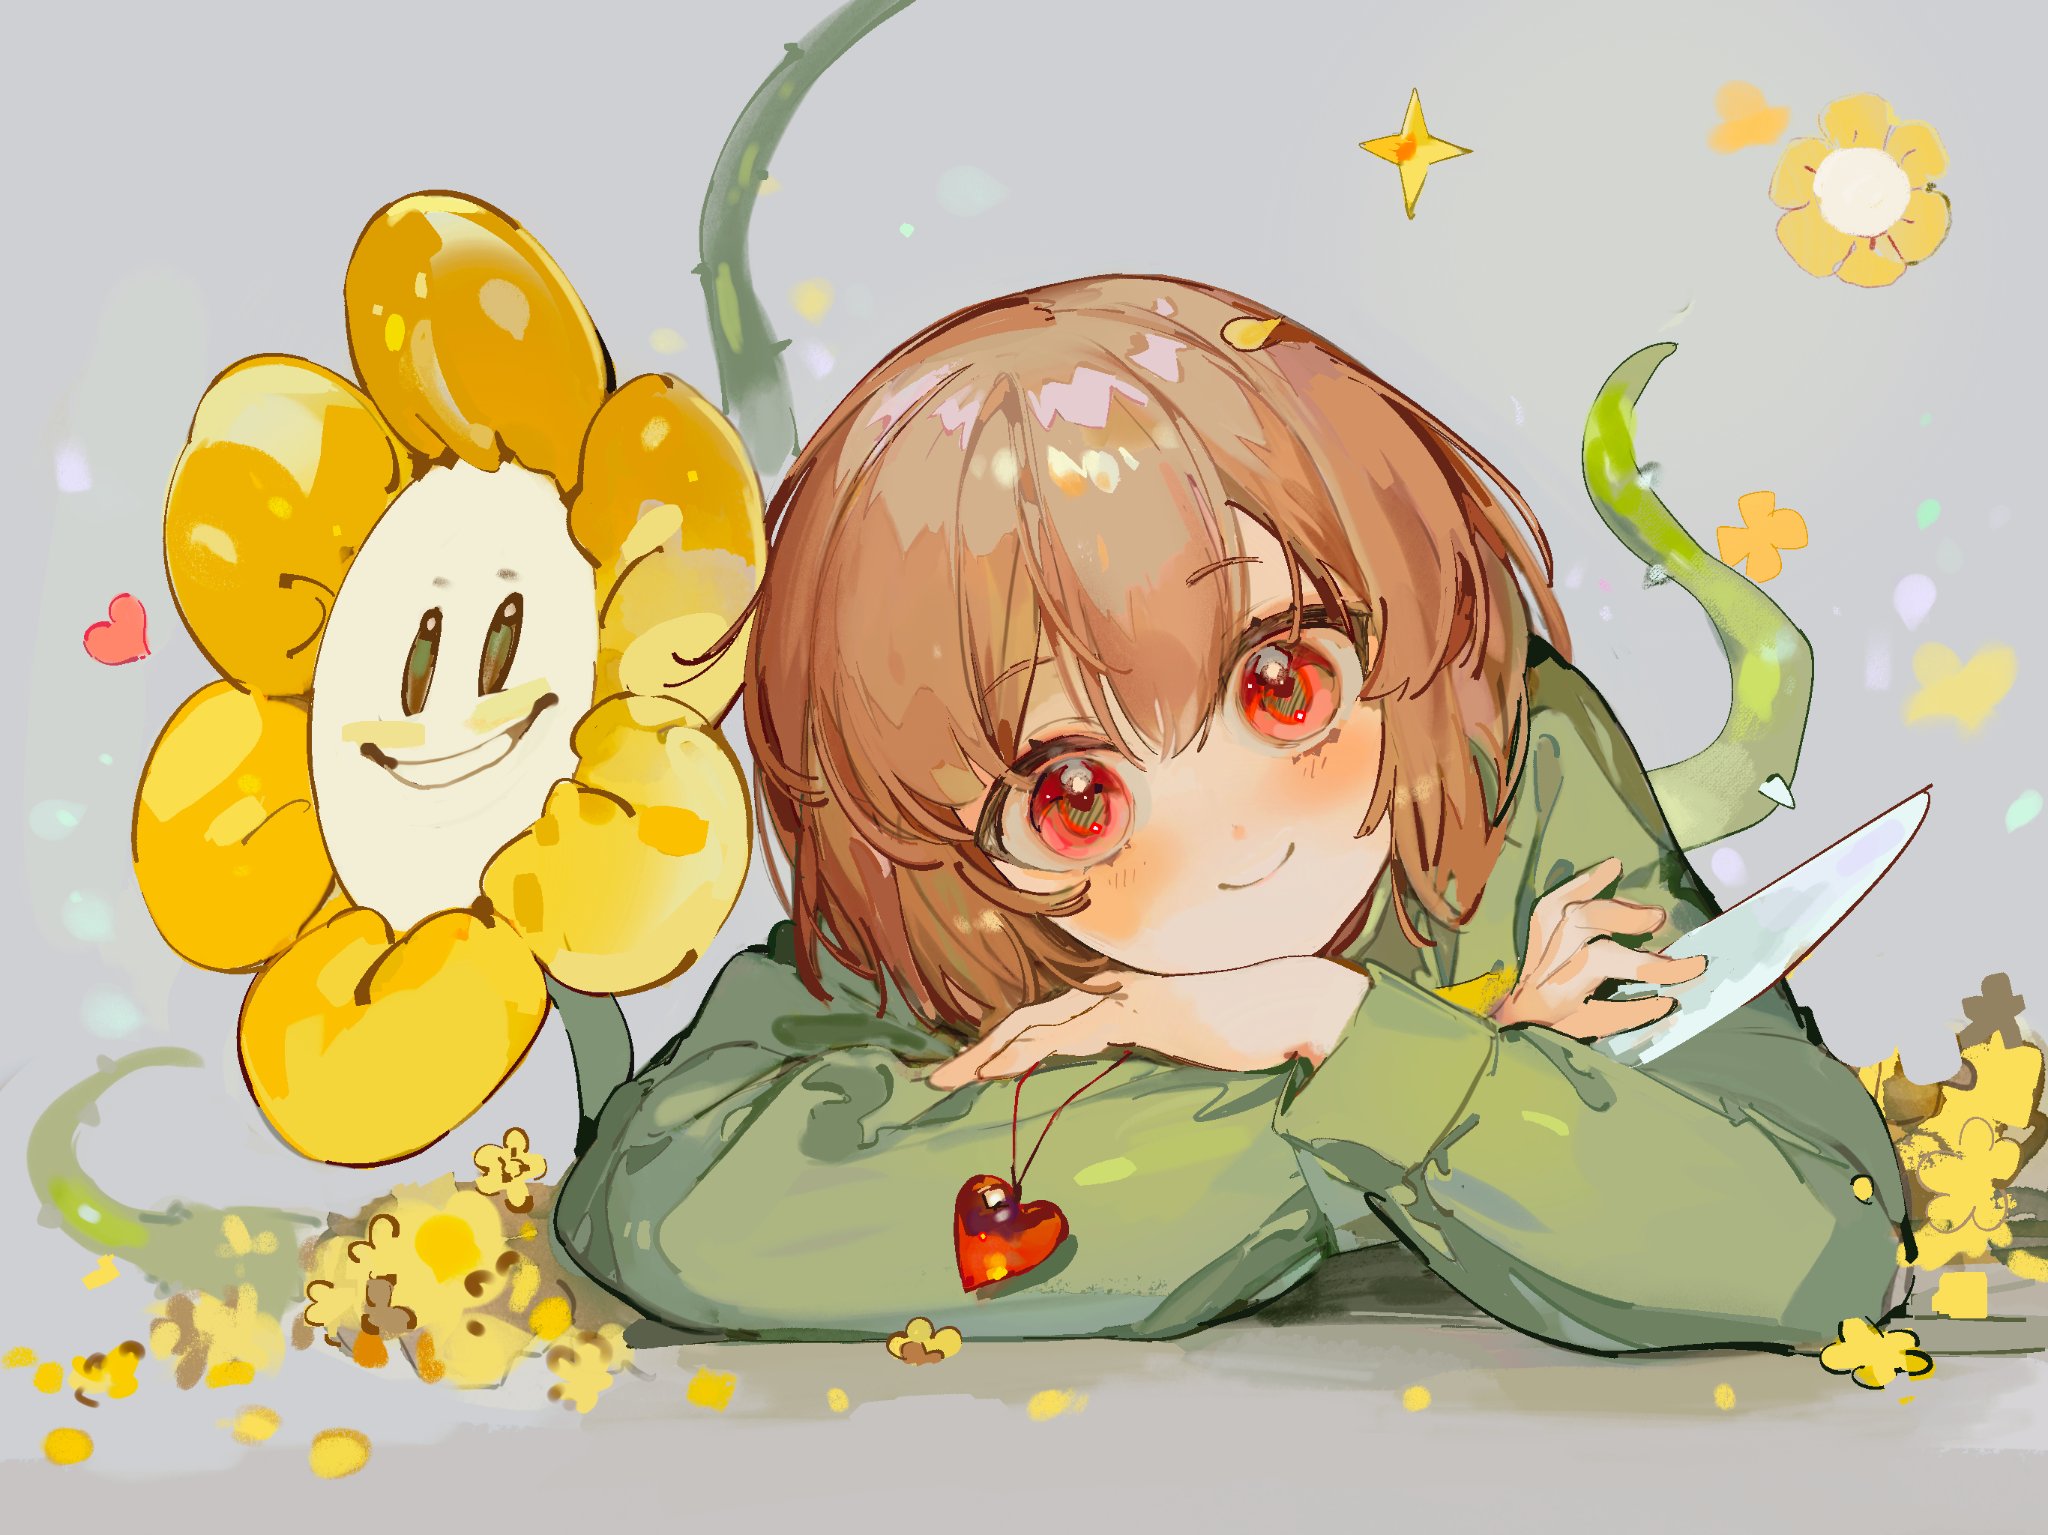 chara and flowey (undertale) drawn by vihua6